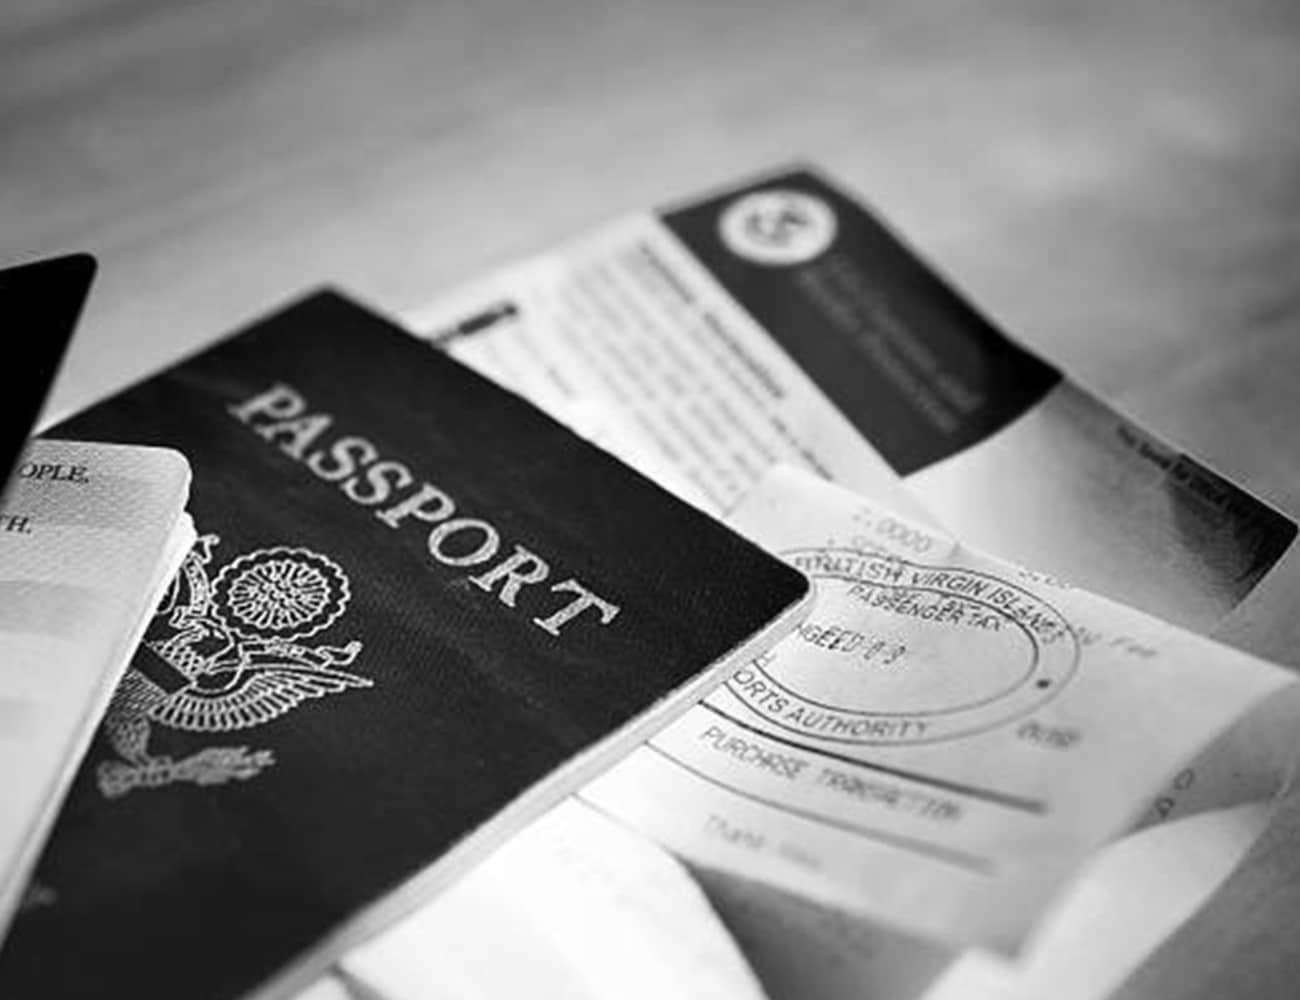 Passport and Other Travel Documents